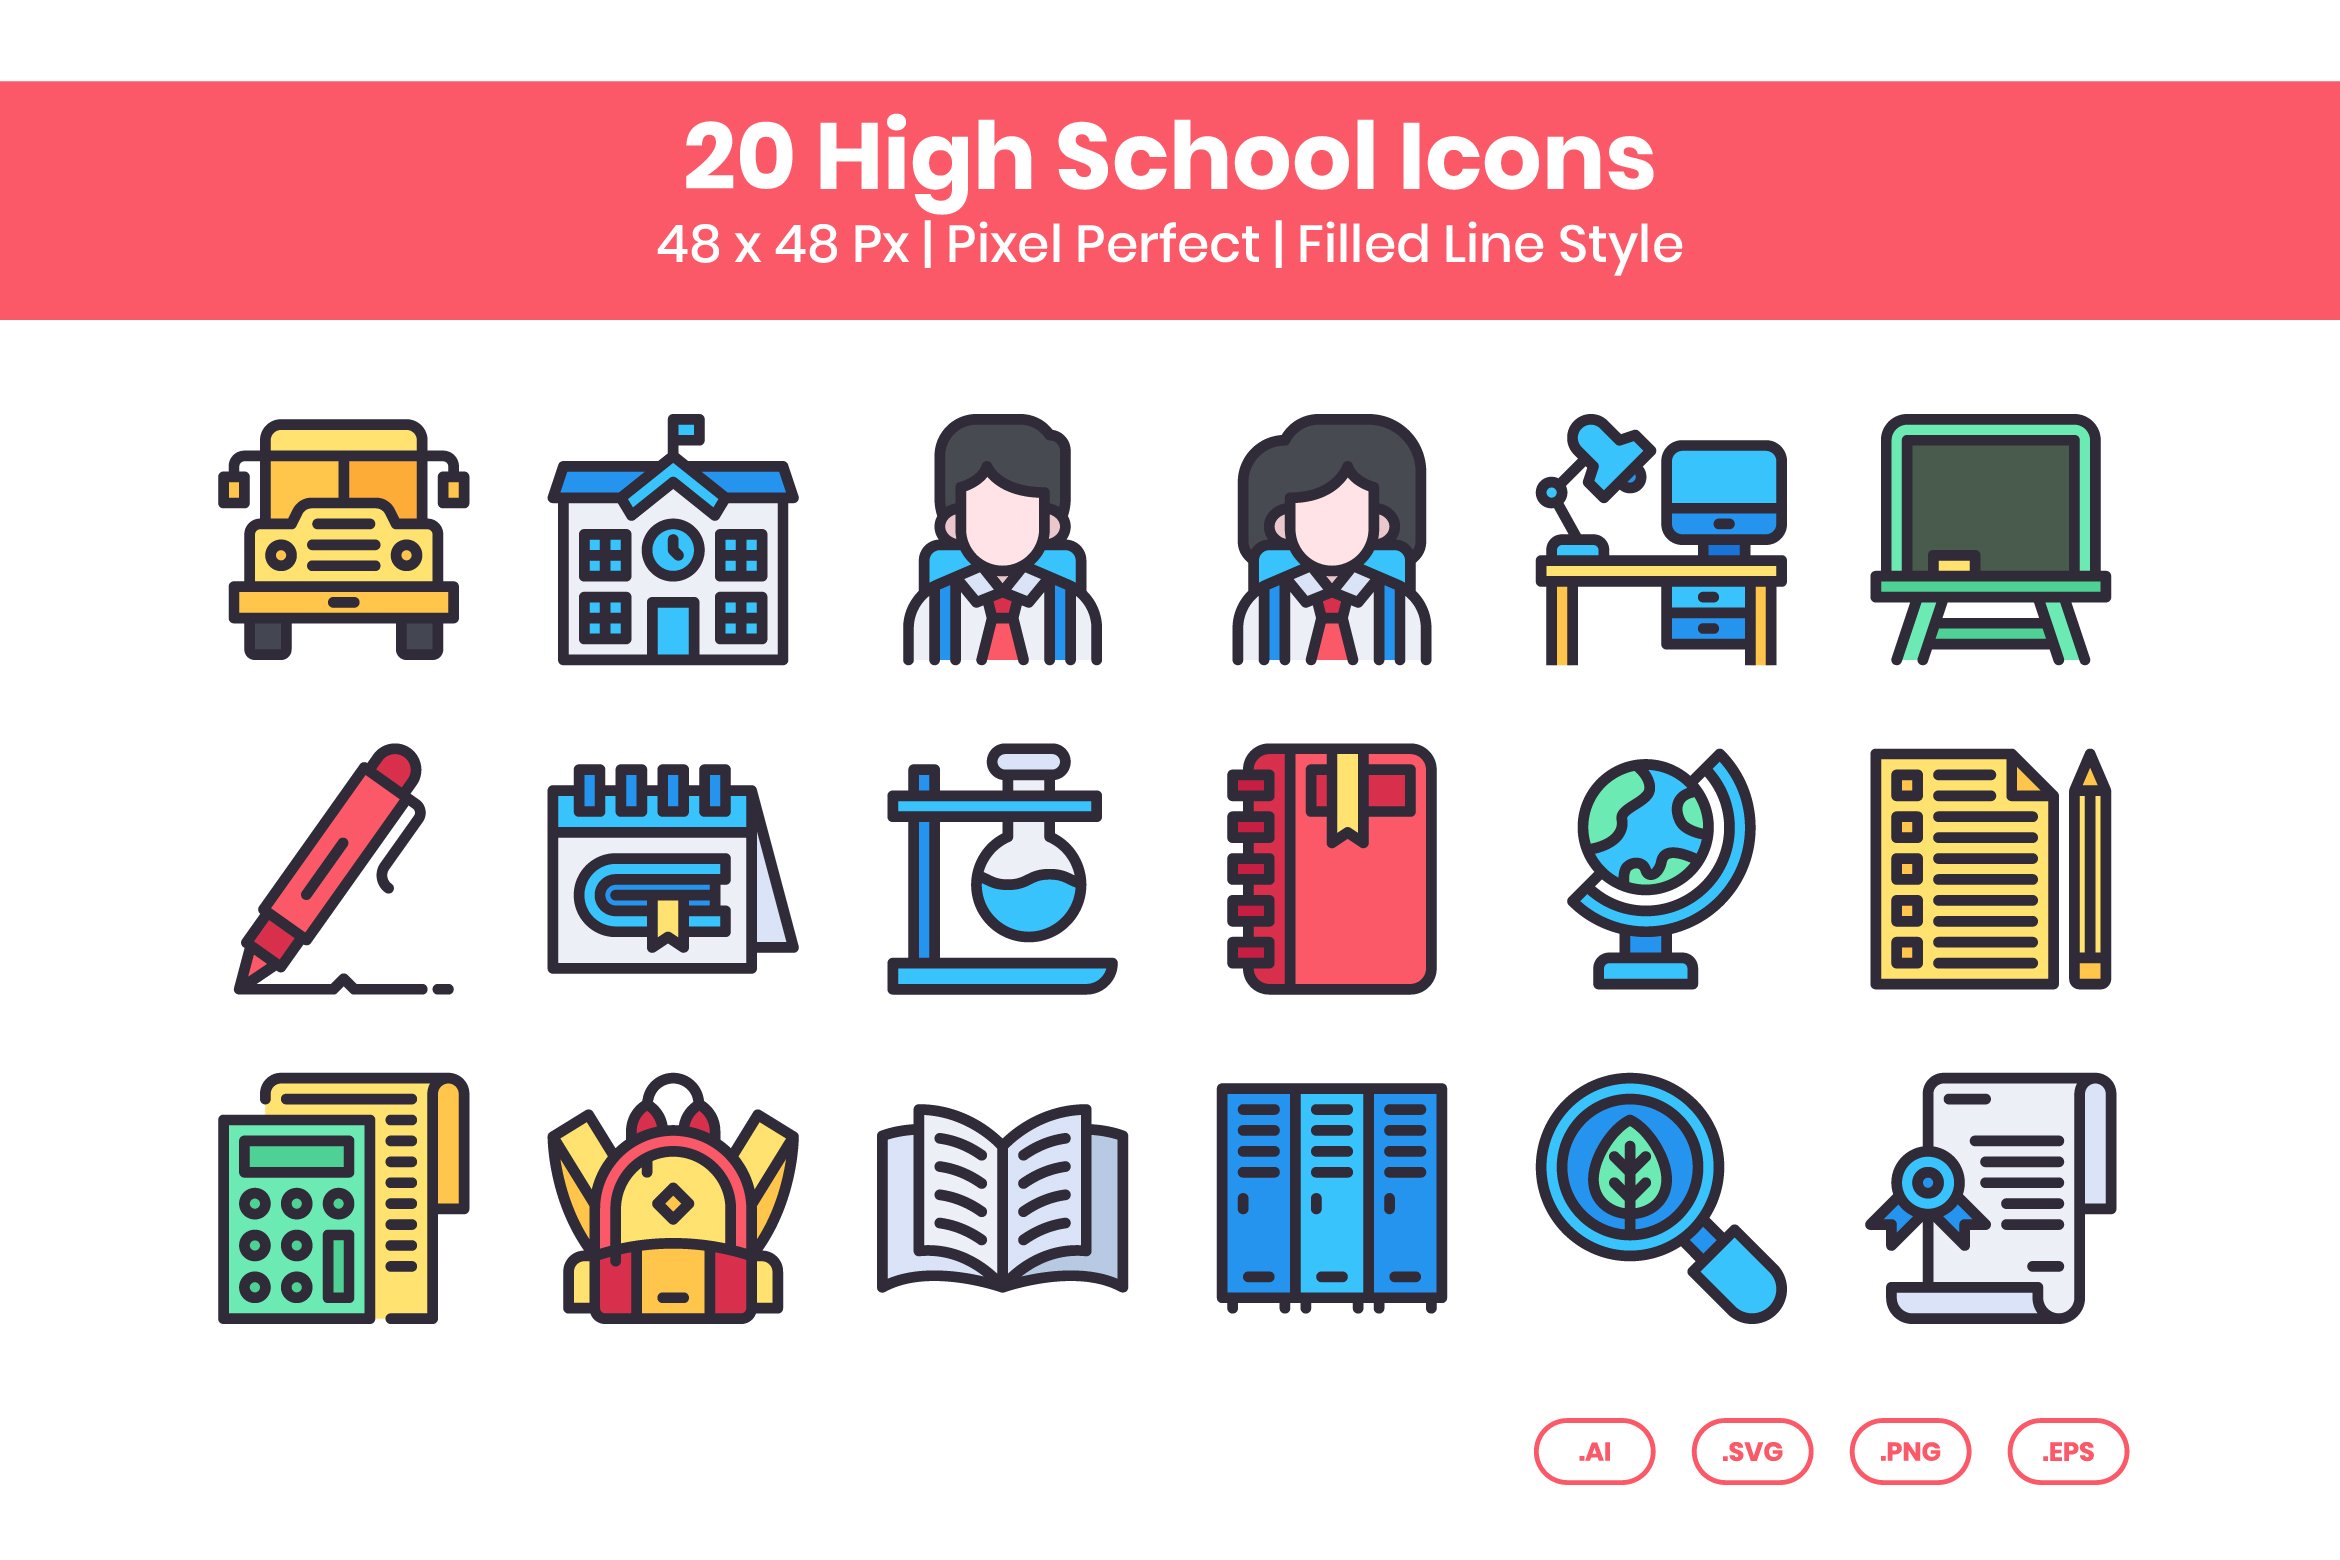 20 High School - Filled Line cover image.